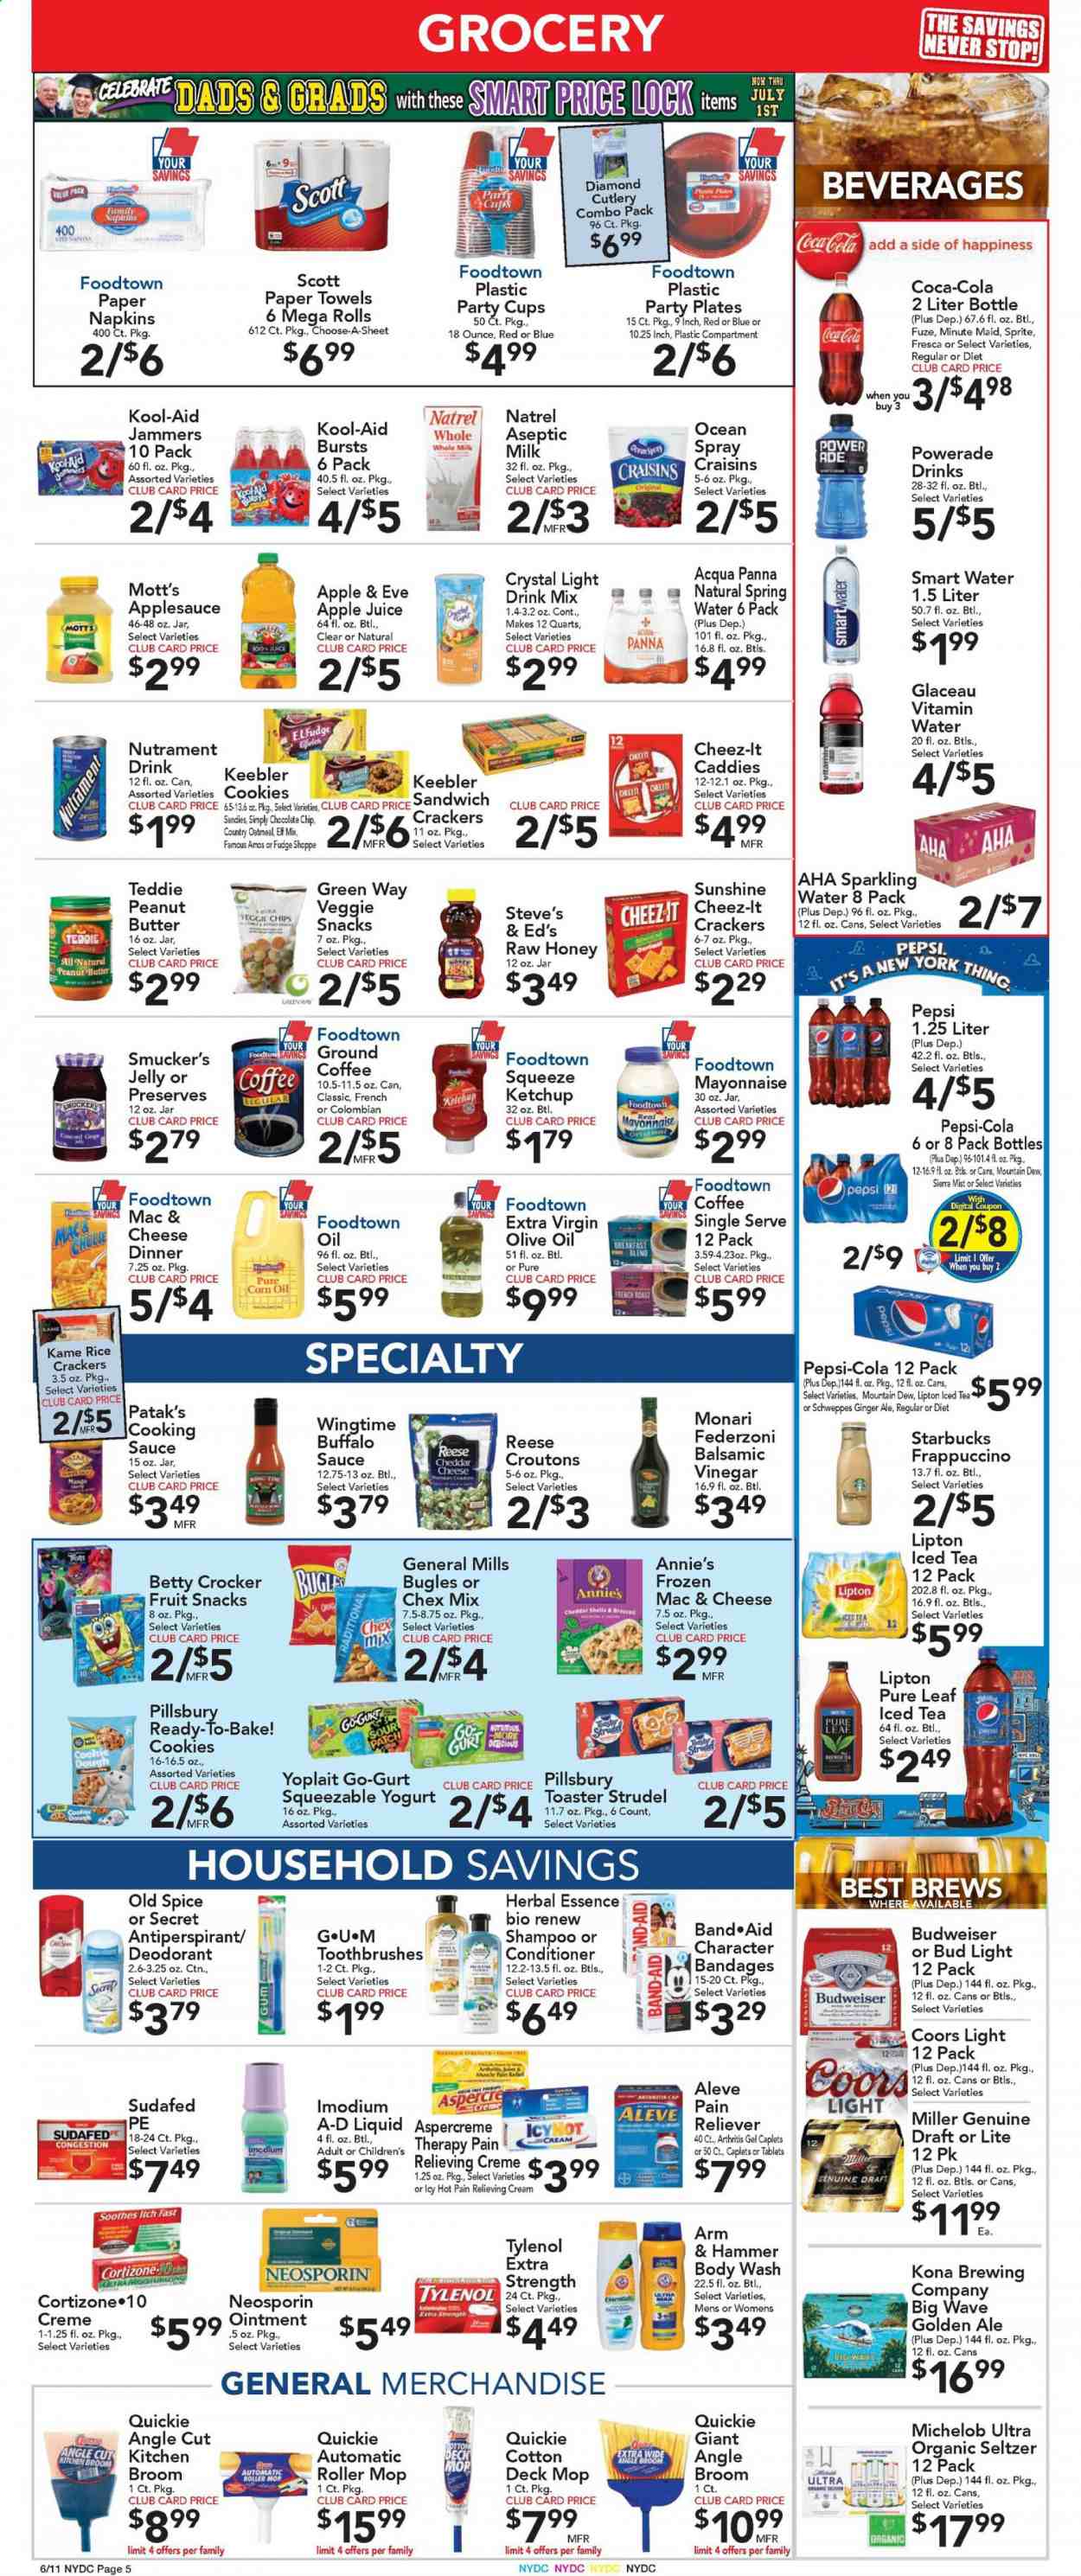 thumbnail - Foodtown Flyer - 06/11/2021 - 06/17/2021 - Sales products - Budweiser, Coors, Michelob, strudel, corn, mango, Mott's, sandwich, sauce, Pillsbury, Annie's, yoghurt, Yoplait, milk, Sunshine, mayonnaise, cookie dough, cookies, fudge, jelly, crackers, fruit snack, Keebler, rice crackers, Chex Mix, ARM & HAMMER, croutons, oatmeal, craisins, spice, ketchup, corn oil, extra virgin olive oil, olive oil, apple sauce, honey, peanut butter, dried fruit, apple juice, Coca-Cola, ginger ale, Mountain Dew, Schweppes, Sprite, Powerade, Pepsi, juice, Lipton, ice tea, Sierra Mist, fruit punch, seltzer water, spring water, Smartwater, vitamin water, Pure Leaf, coffee, Starbucks, ground coffee, frappuccino, beer, Bud Light, Miller, napkins, ointment, kitchen towels, paper towels, WAVE, body wash, shampoo, Old Spice, conditioner, anti-perspirant, deodorant, mop, broom, angle broom, plate, party cups, cup, Aleve, Neosporin, Sudafed, Tylenol, Imodium, Aspercreme. Page 7.